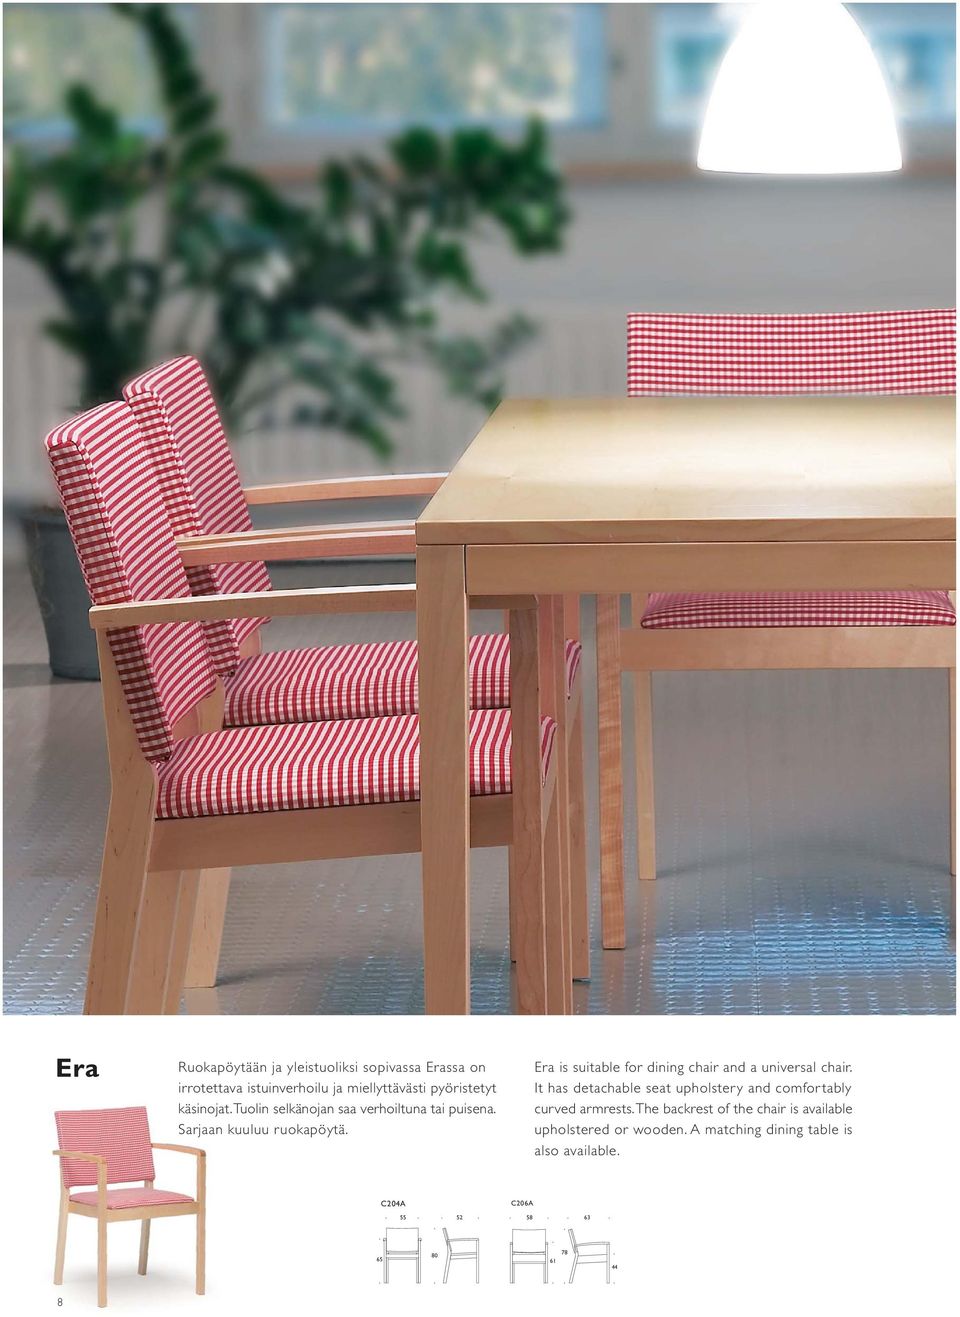 Era is suitable for dining chair and a universal chair.